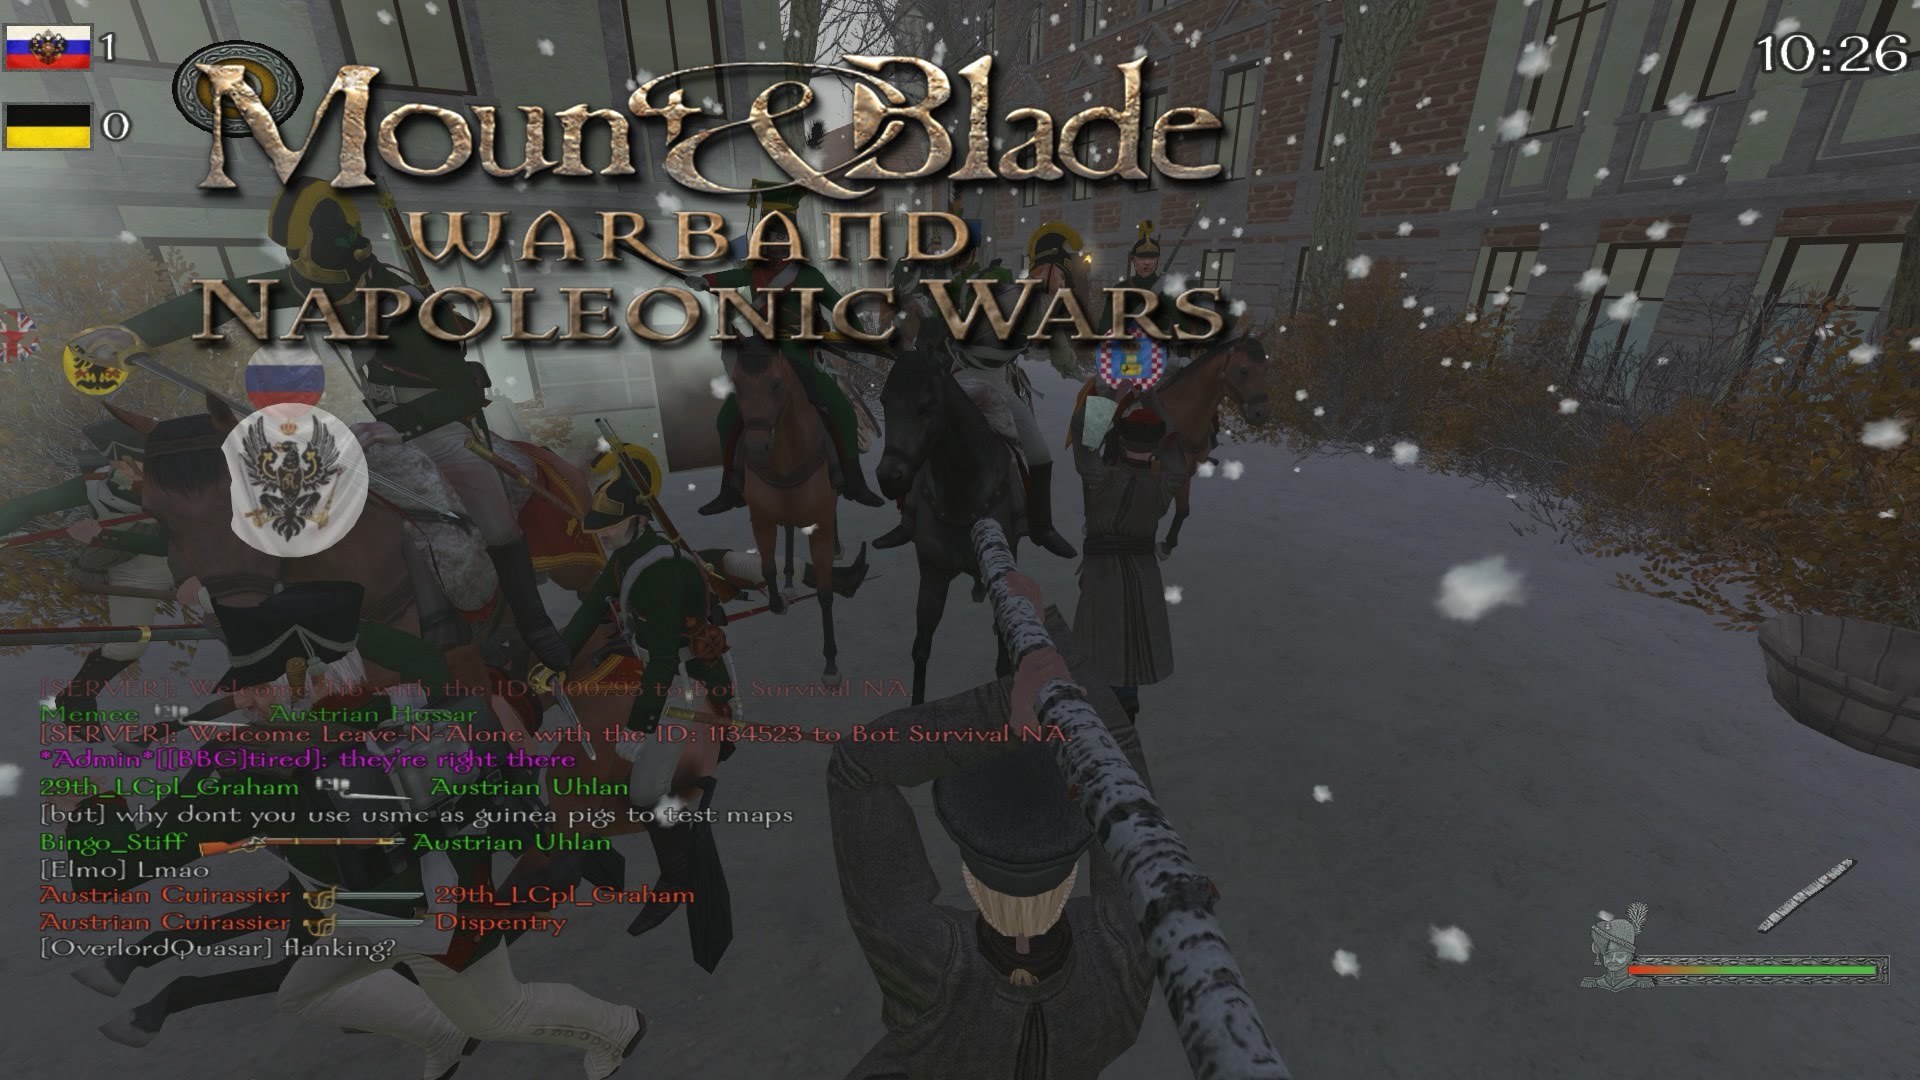 mount and blade napoleonic wars free download